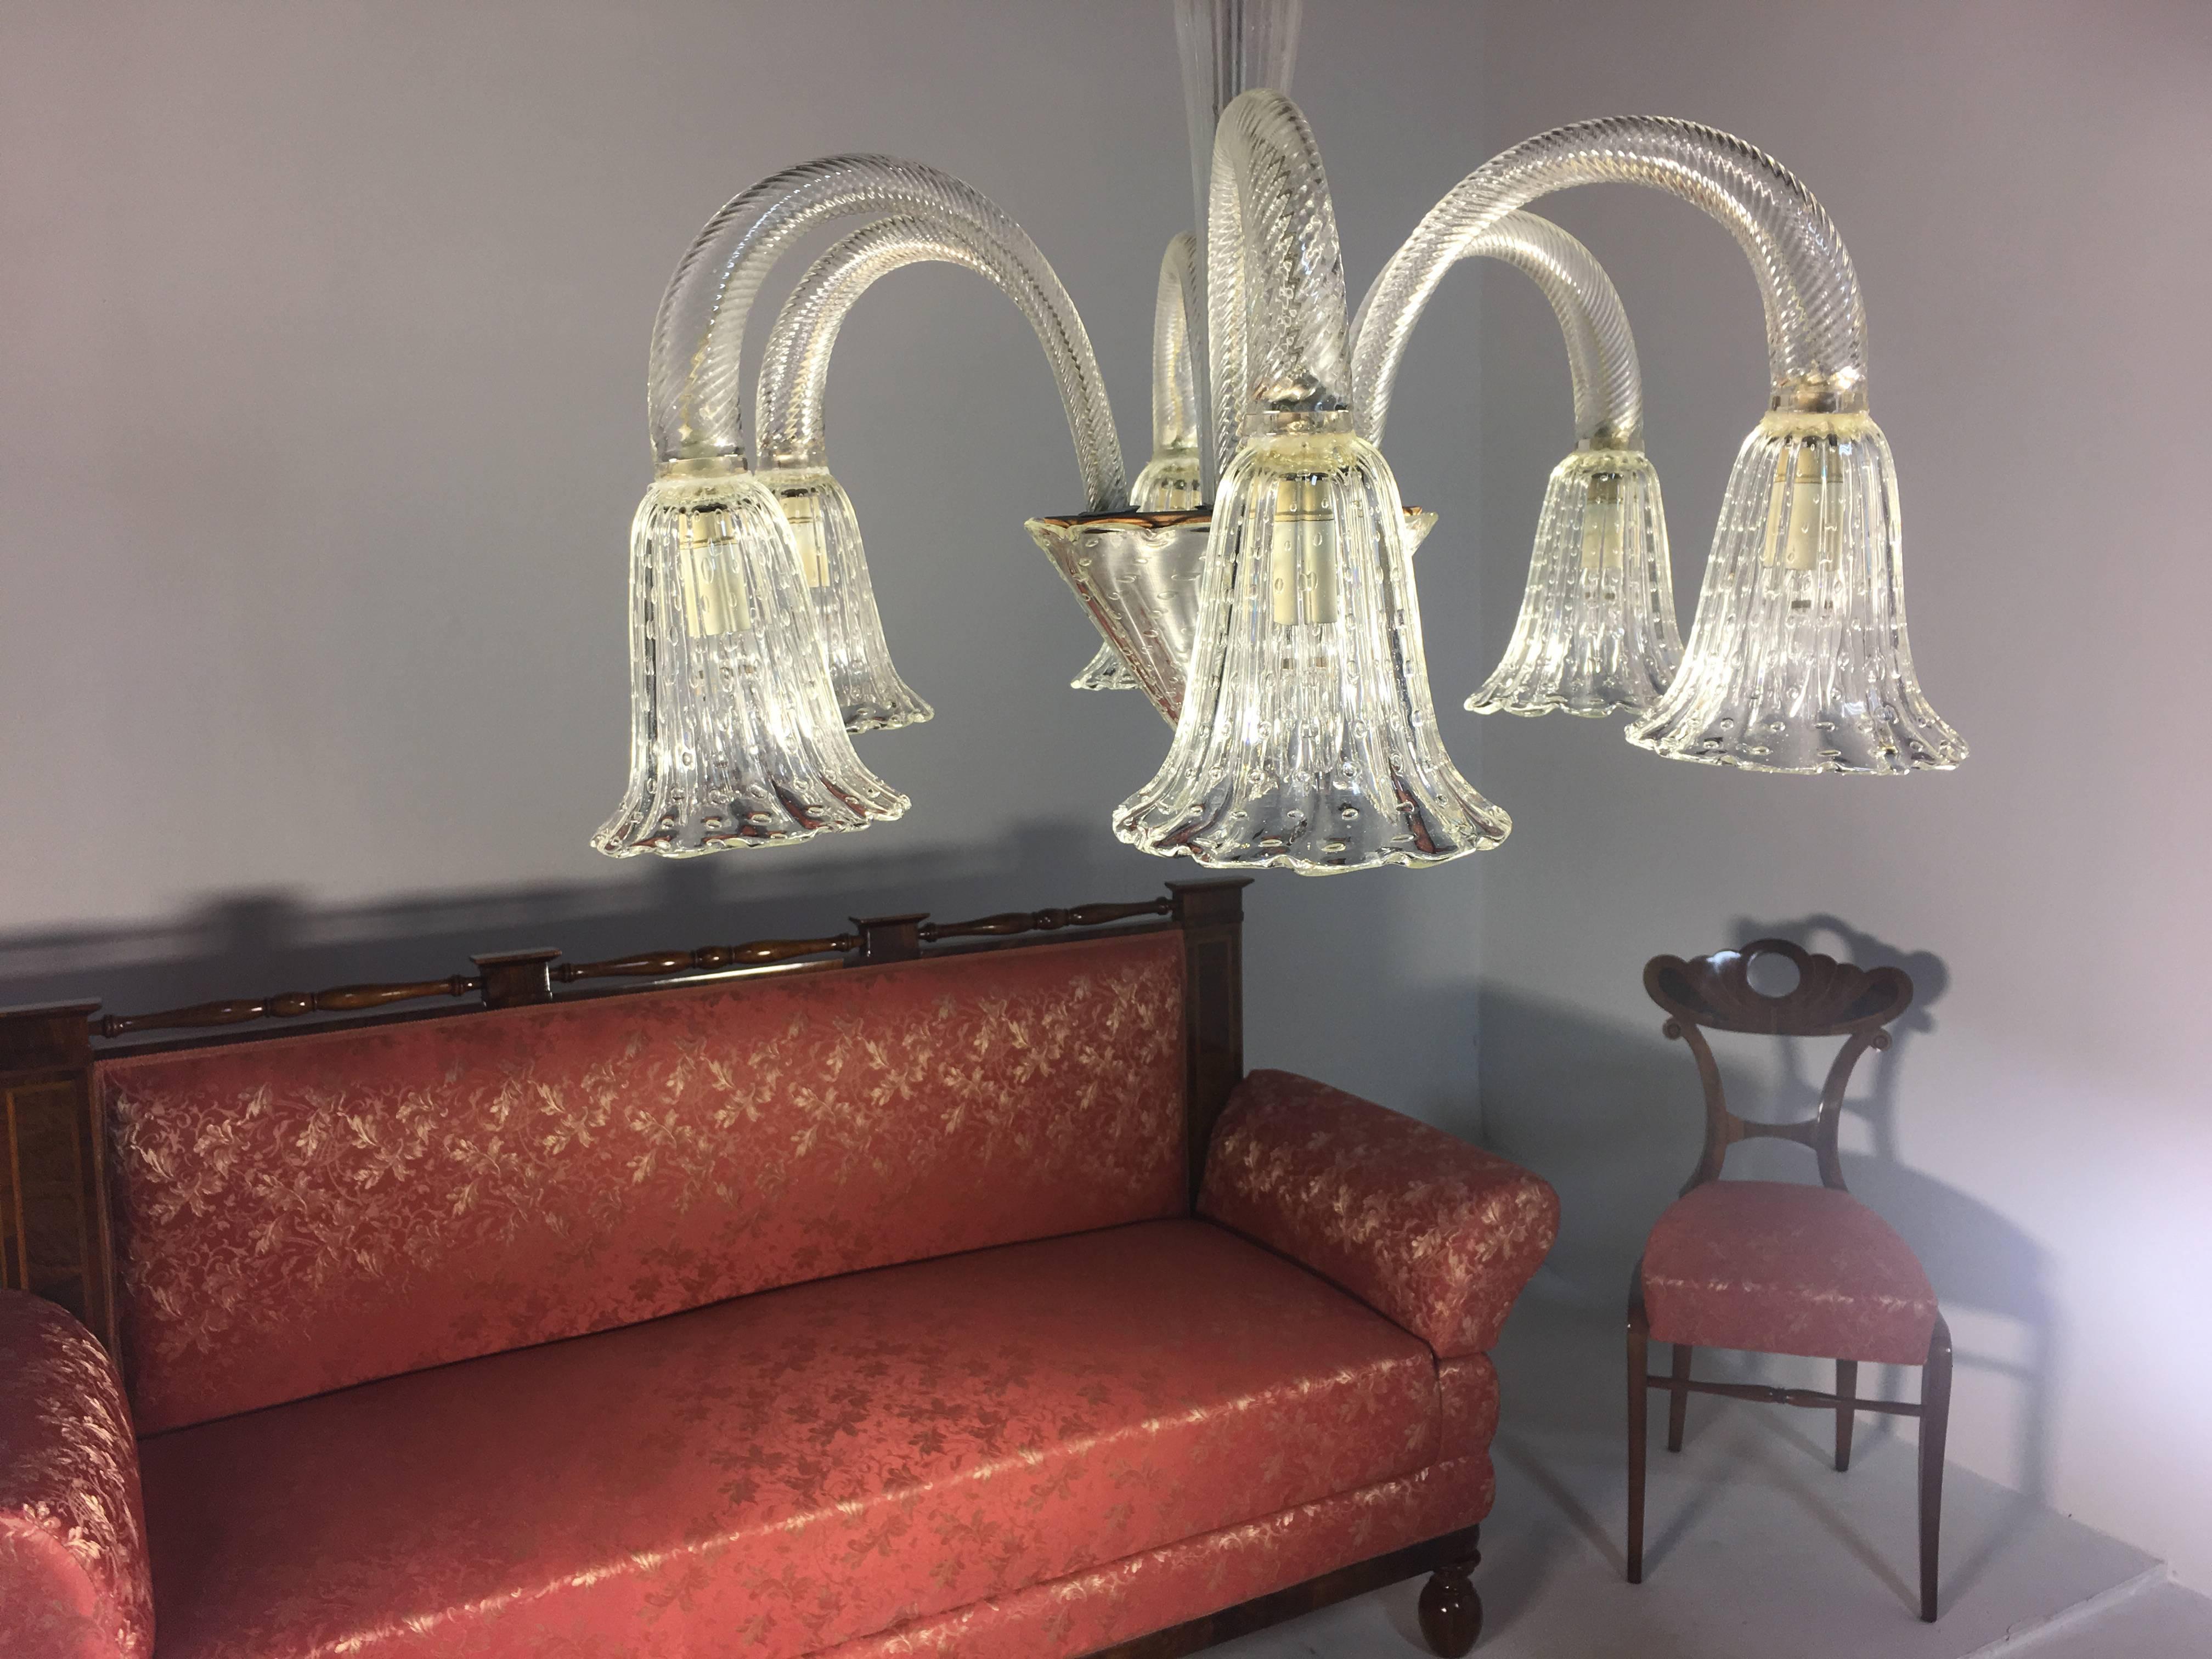 20th Century Art Deco Chandelier by Ercole Barovier, Murano, 1940s For Sale